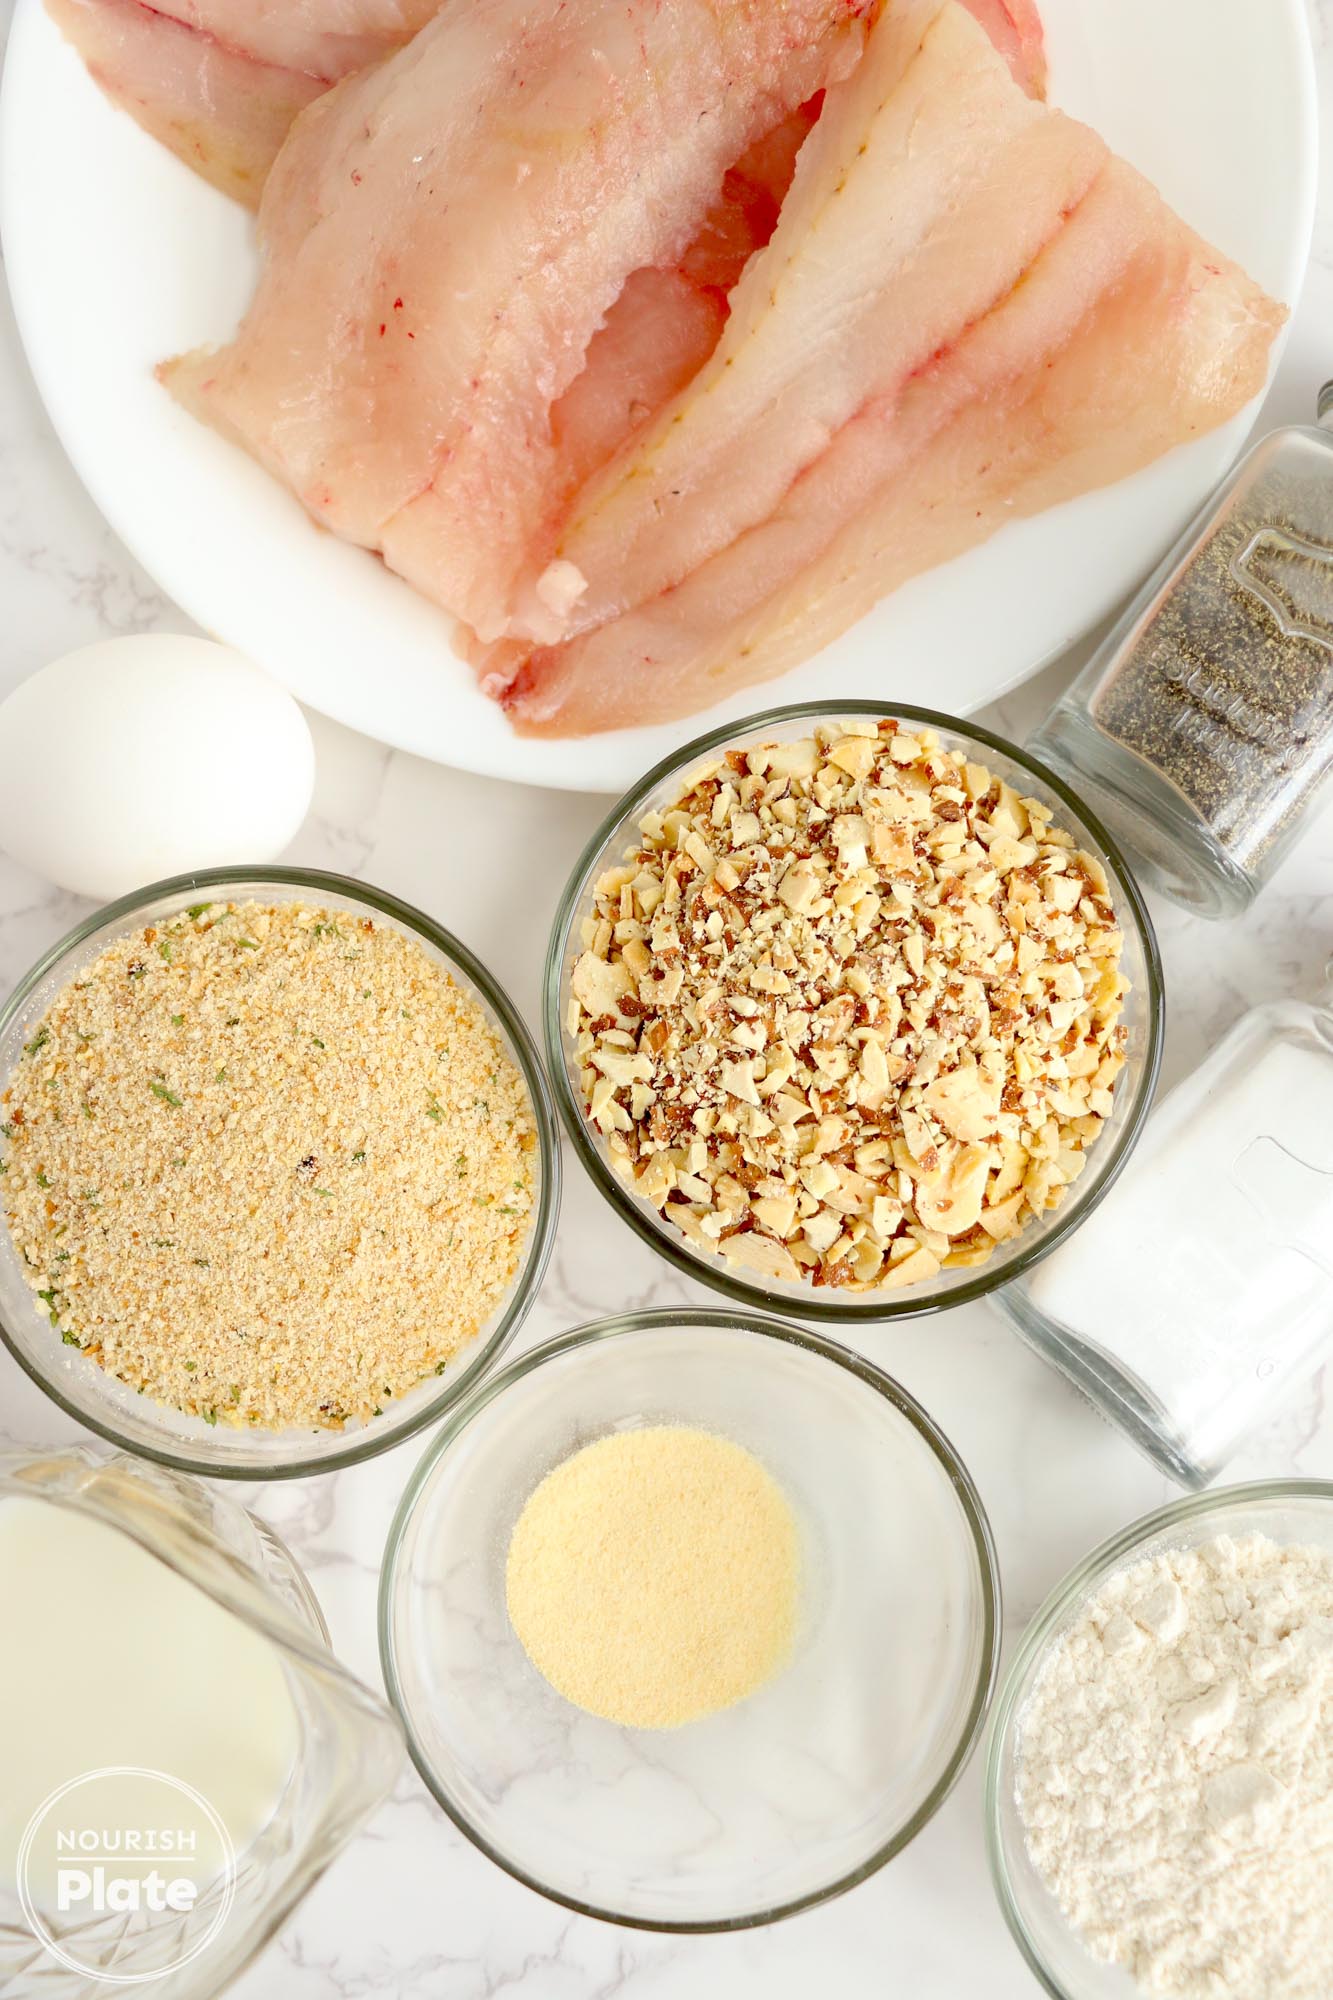 Ingredients needed to make almond crusted fish